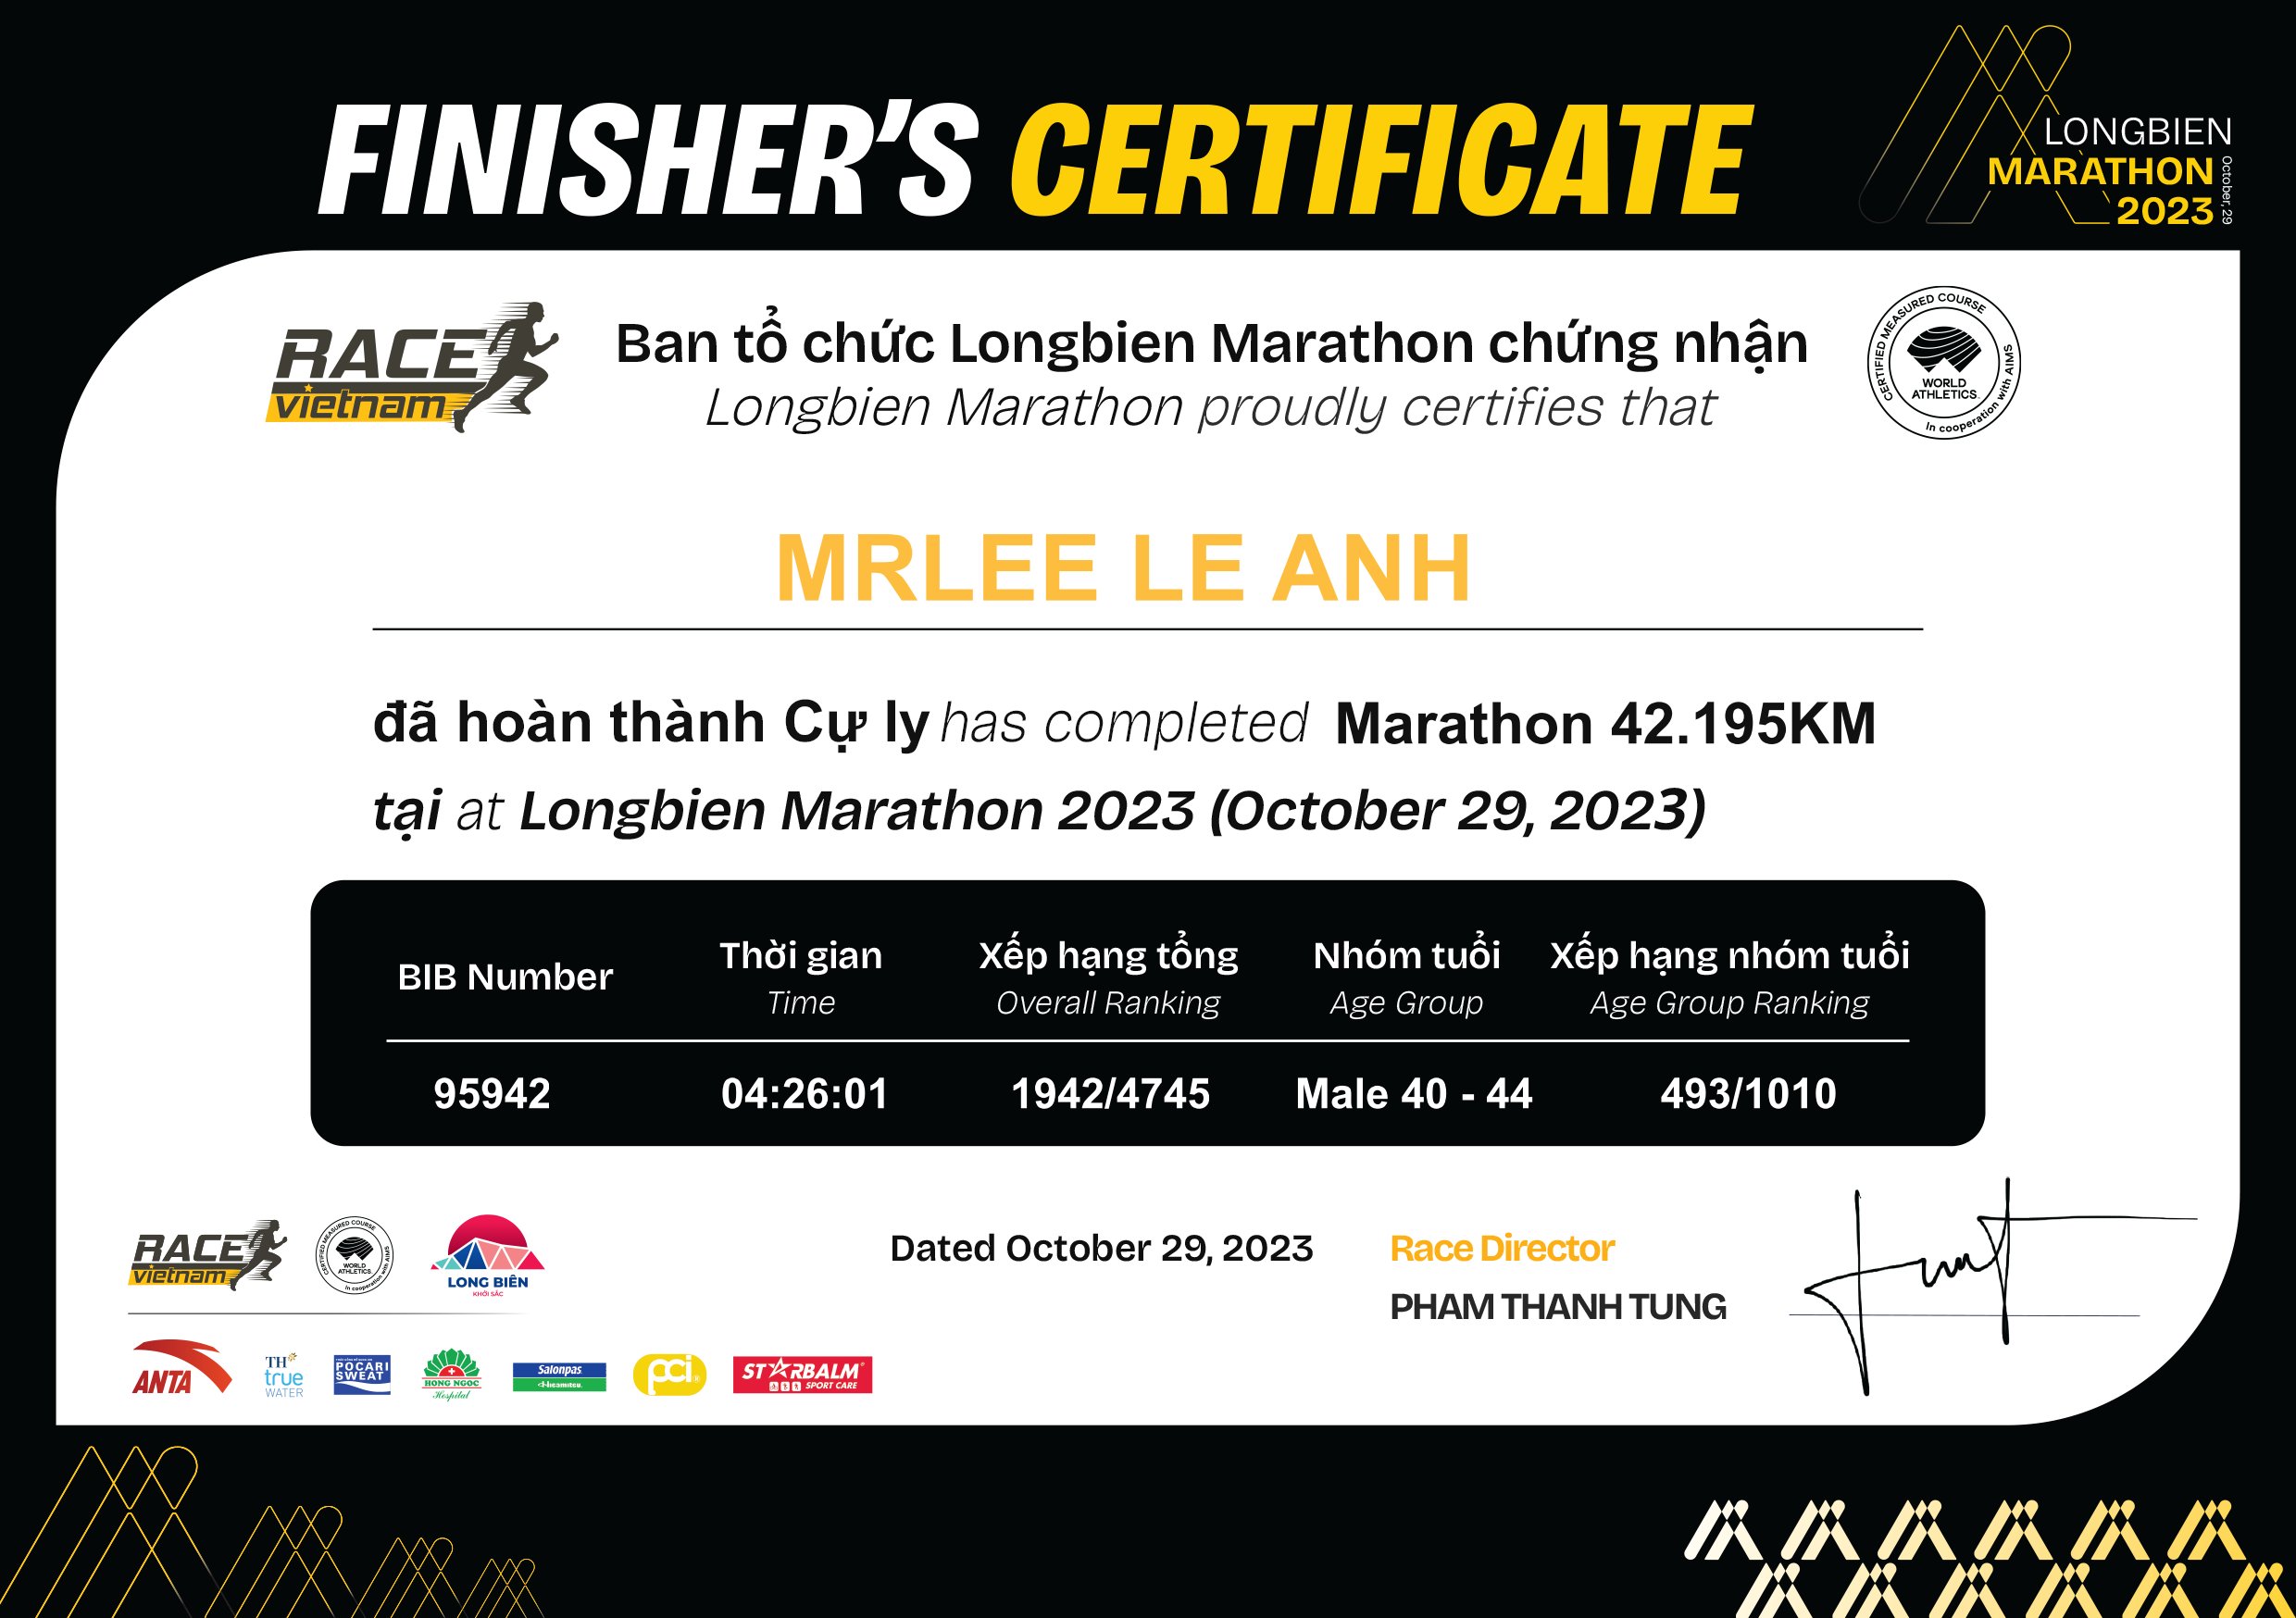 95942 - MrLee Le Anh